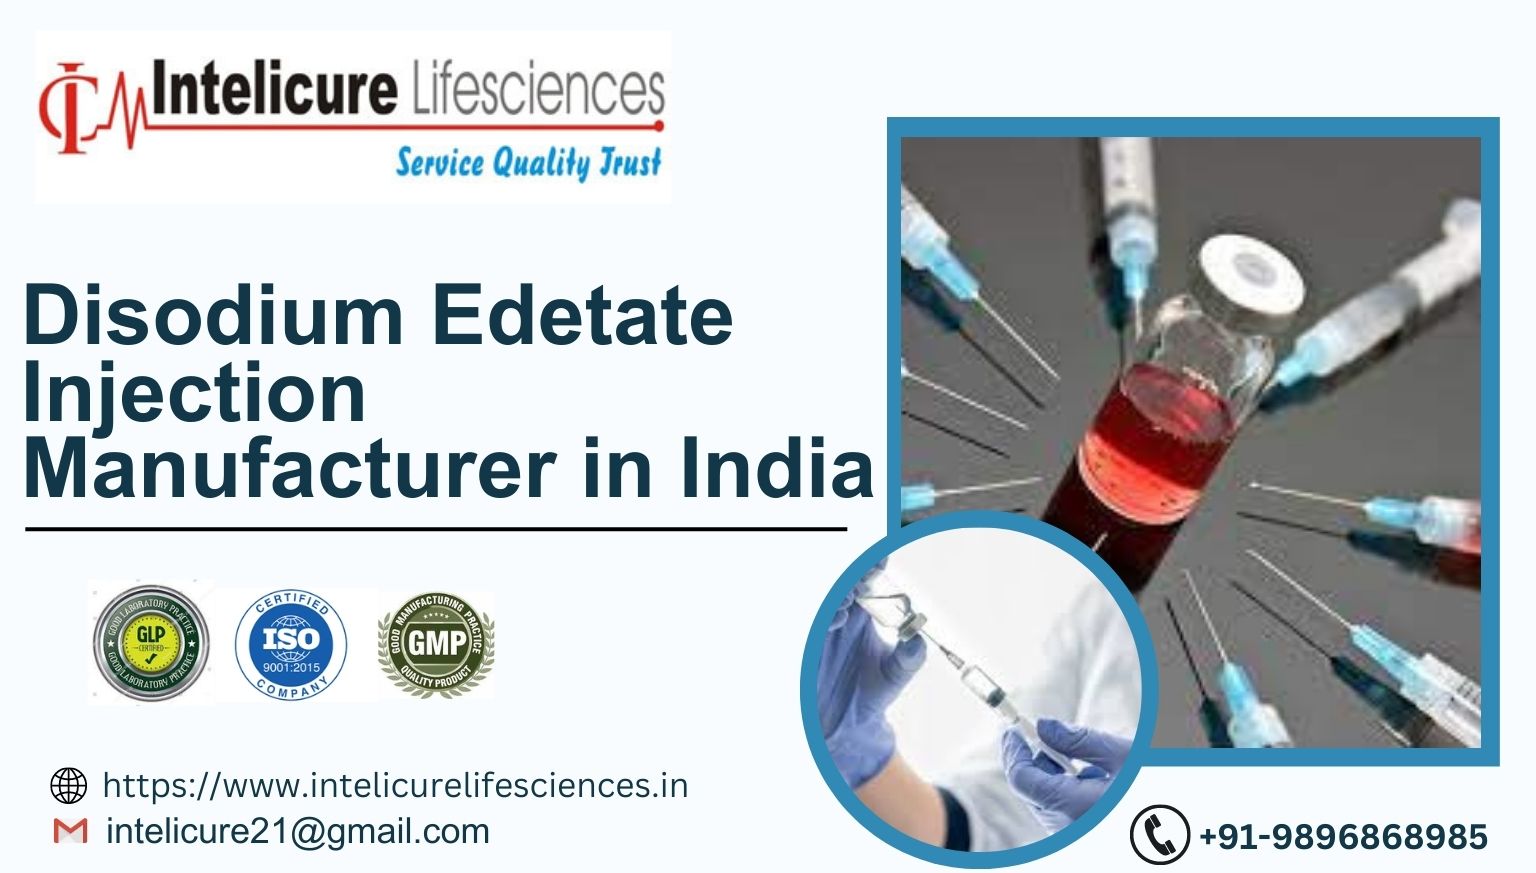 Disodium Edetate Injection Manufacturer in India